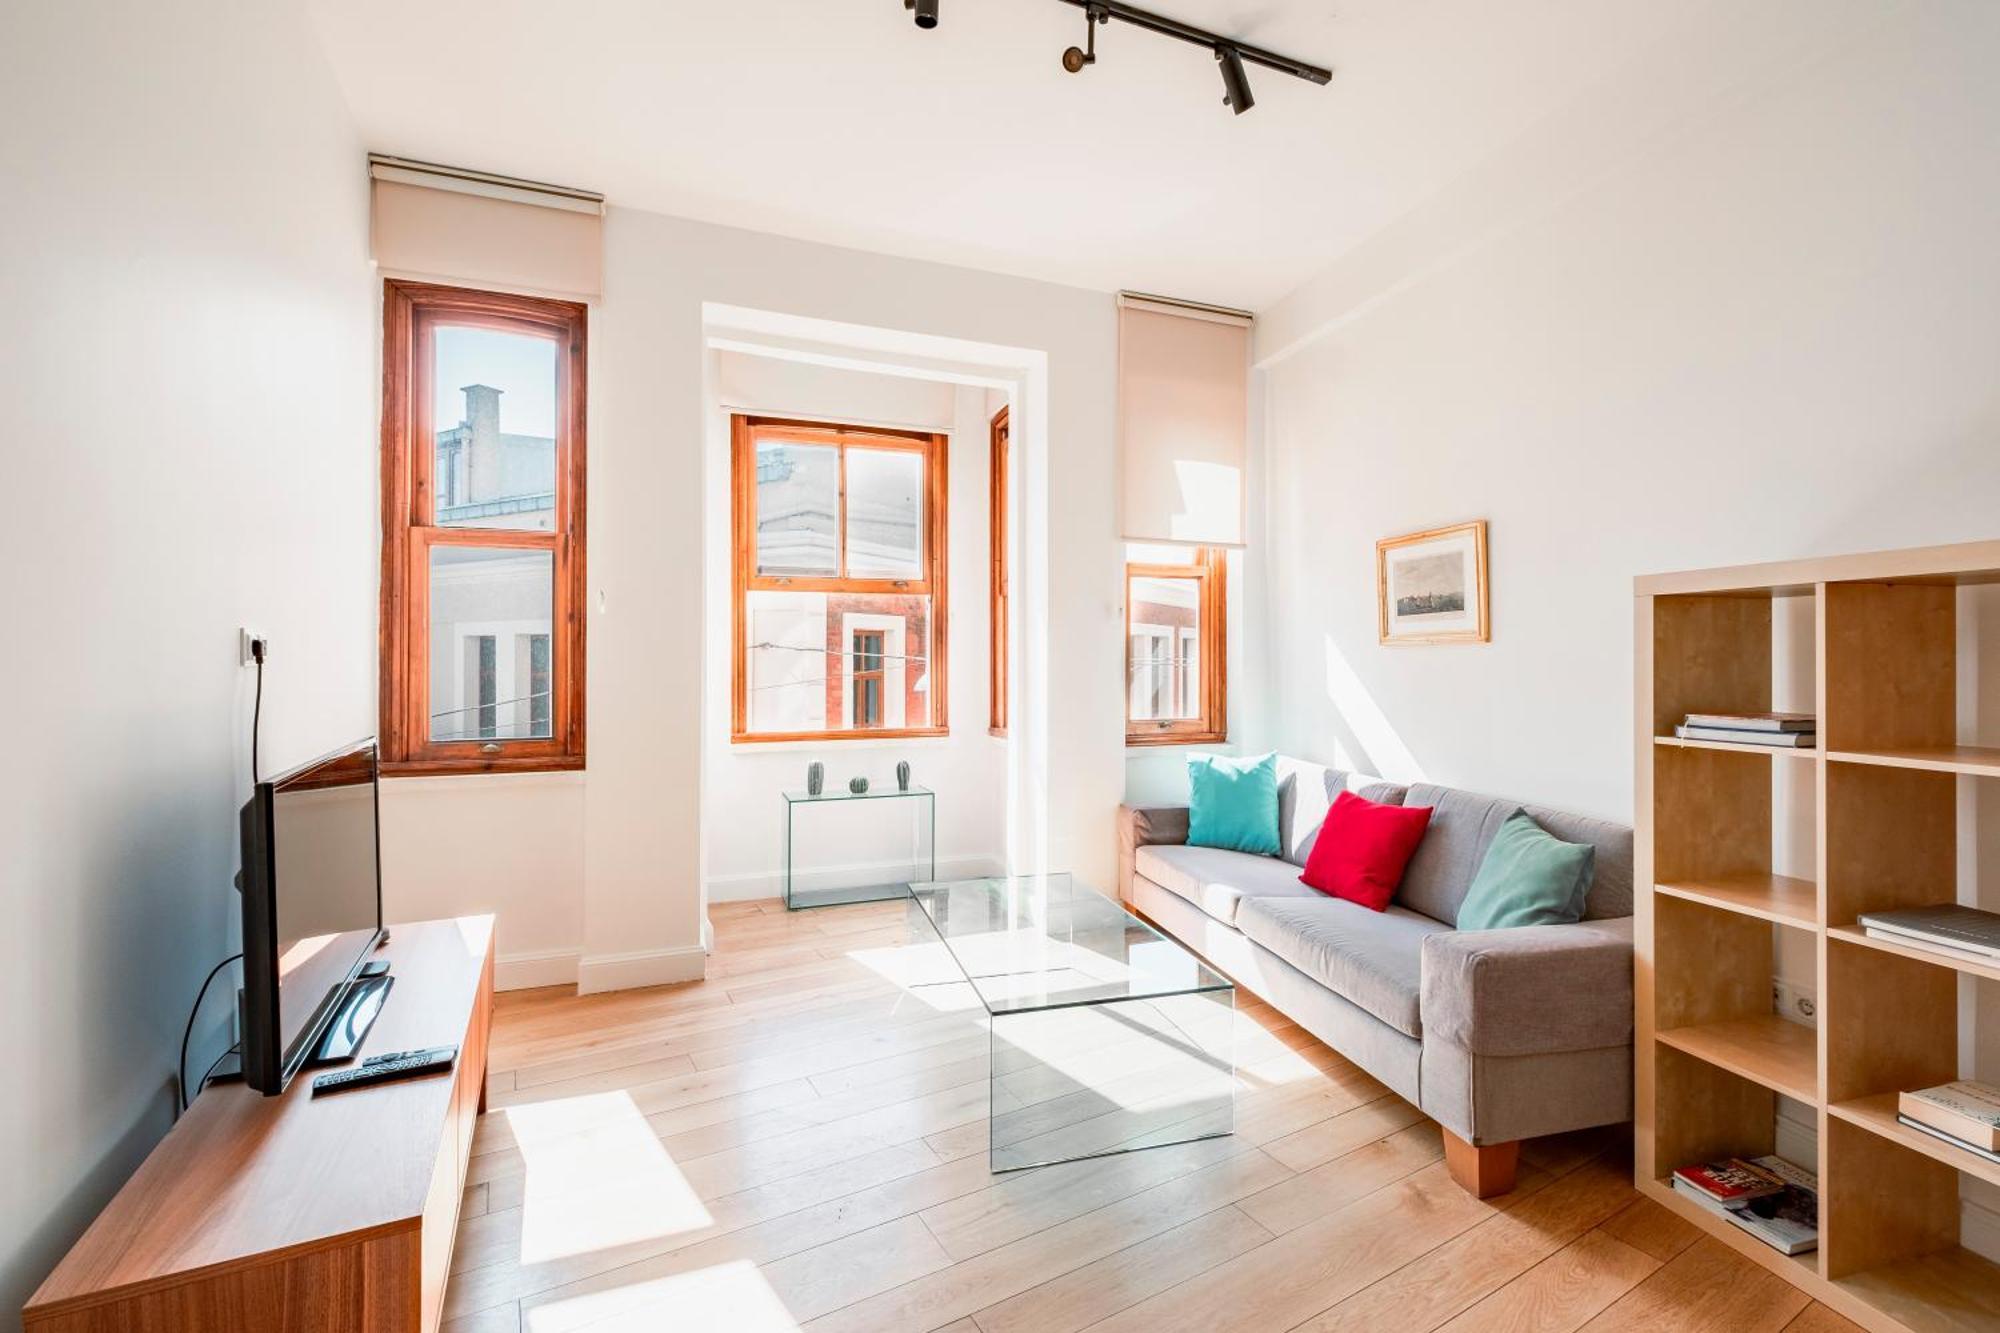 Homie Suites - Historical Apartment Nearby Galata Tower อิสตันบูล ภายนอก รูปภาพ